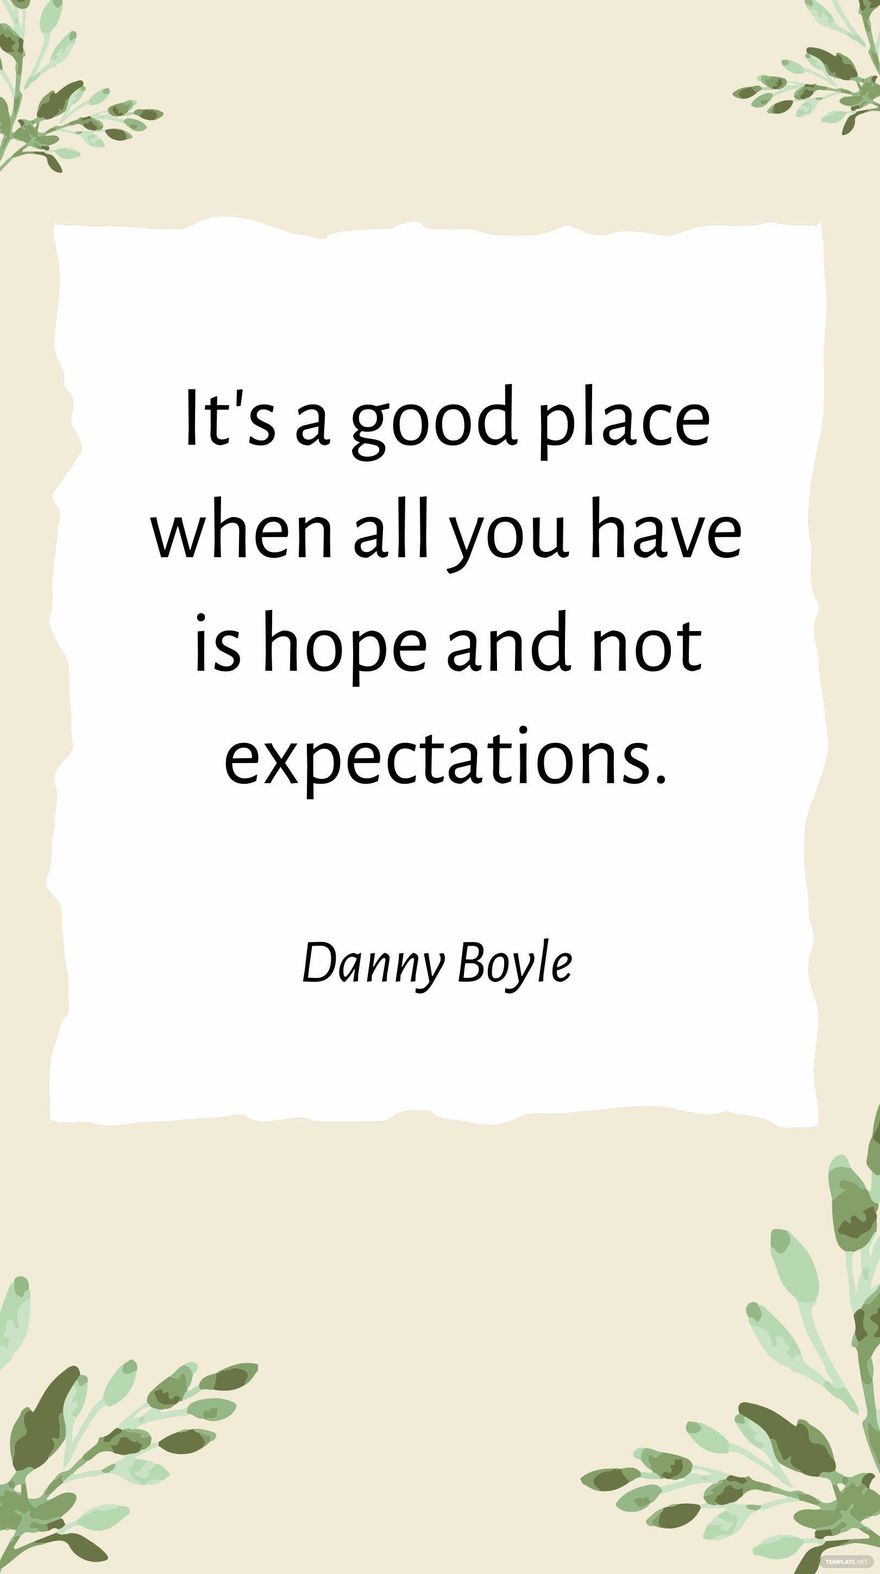 Free Danny Boyle - It's a good place when all you have is hope and not expectations. in JPG